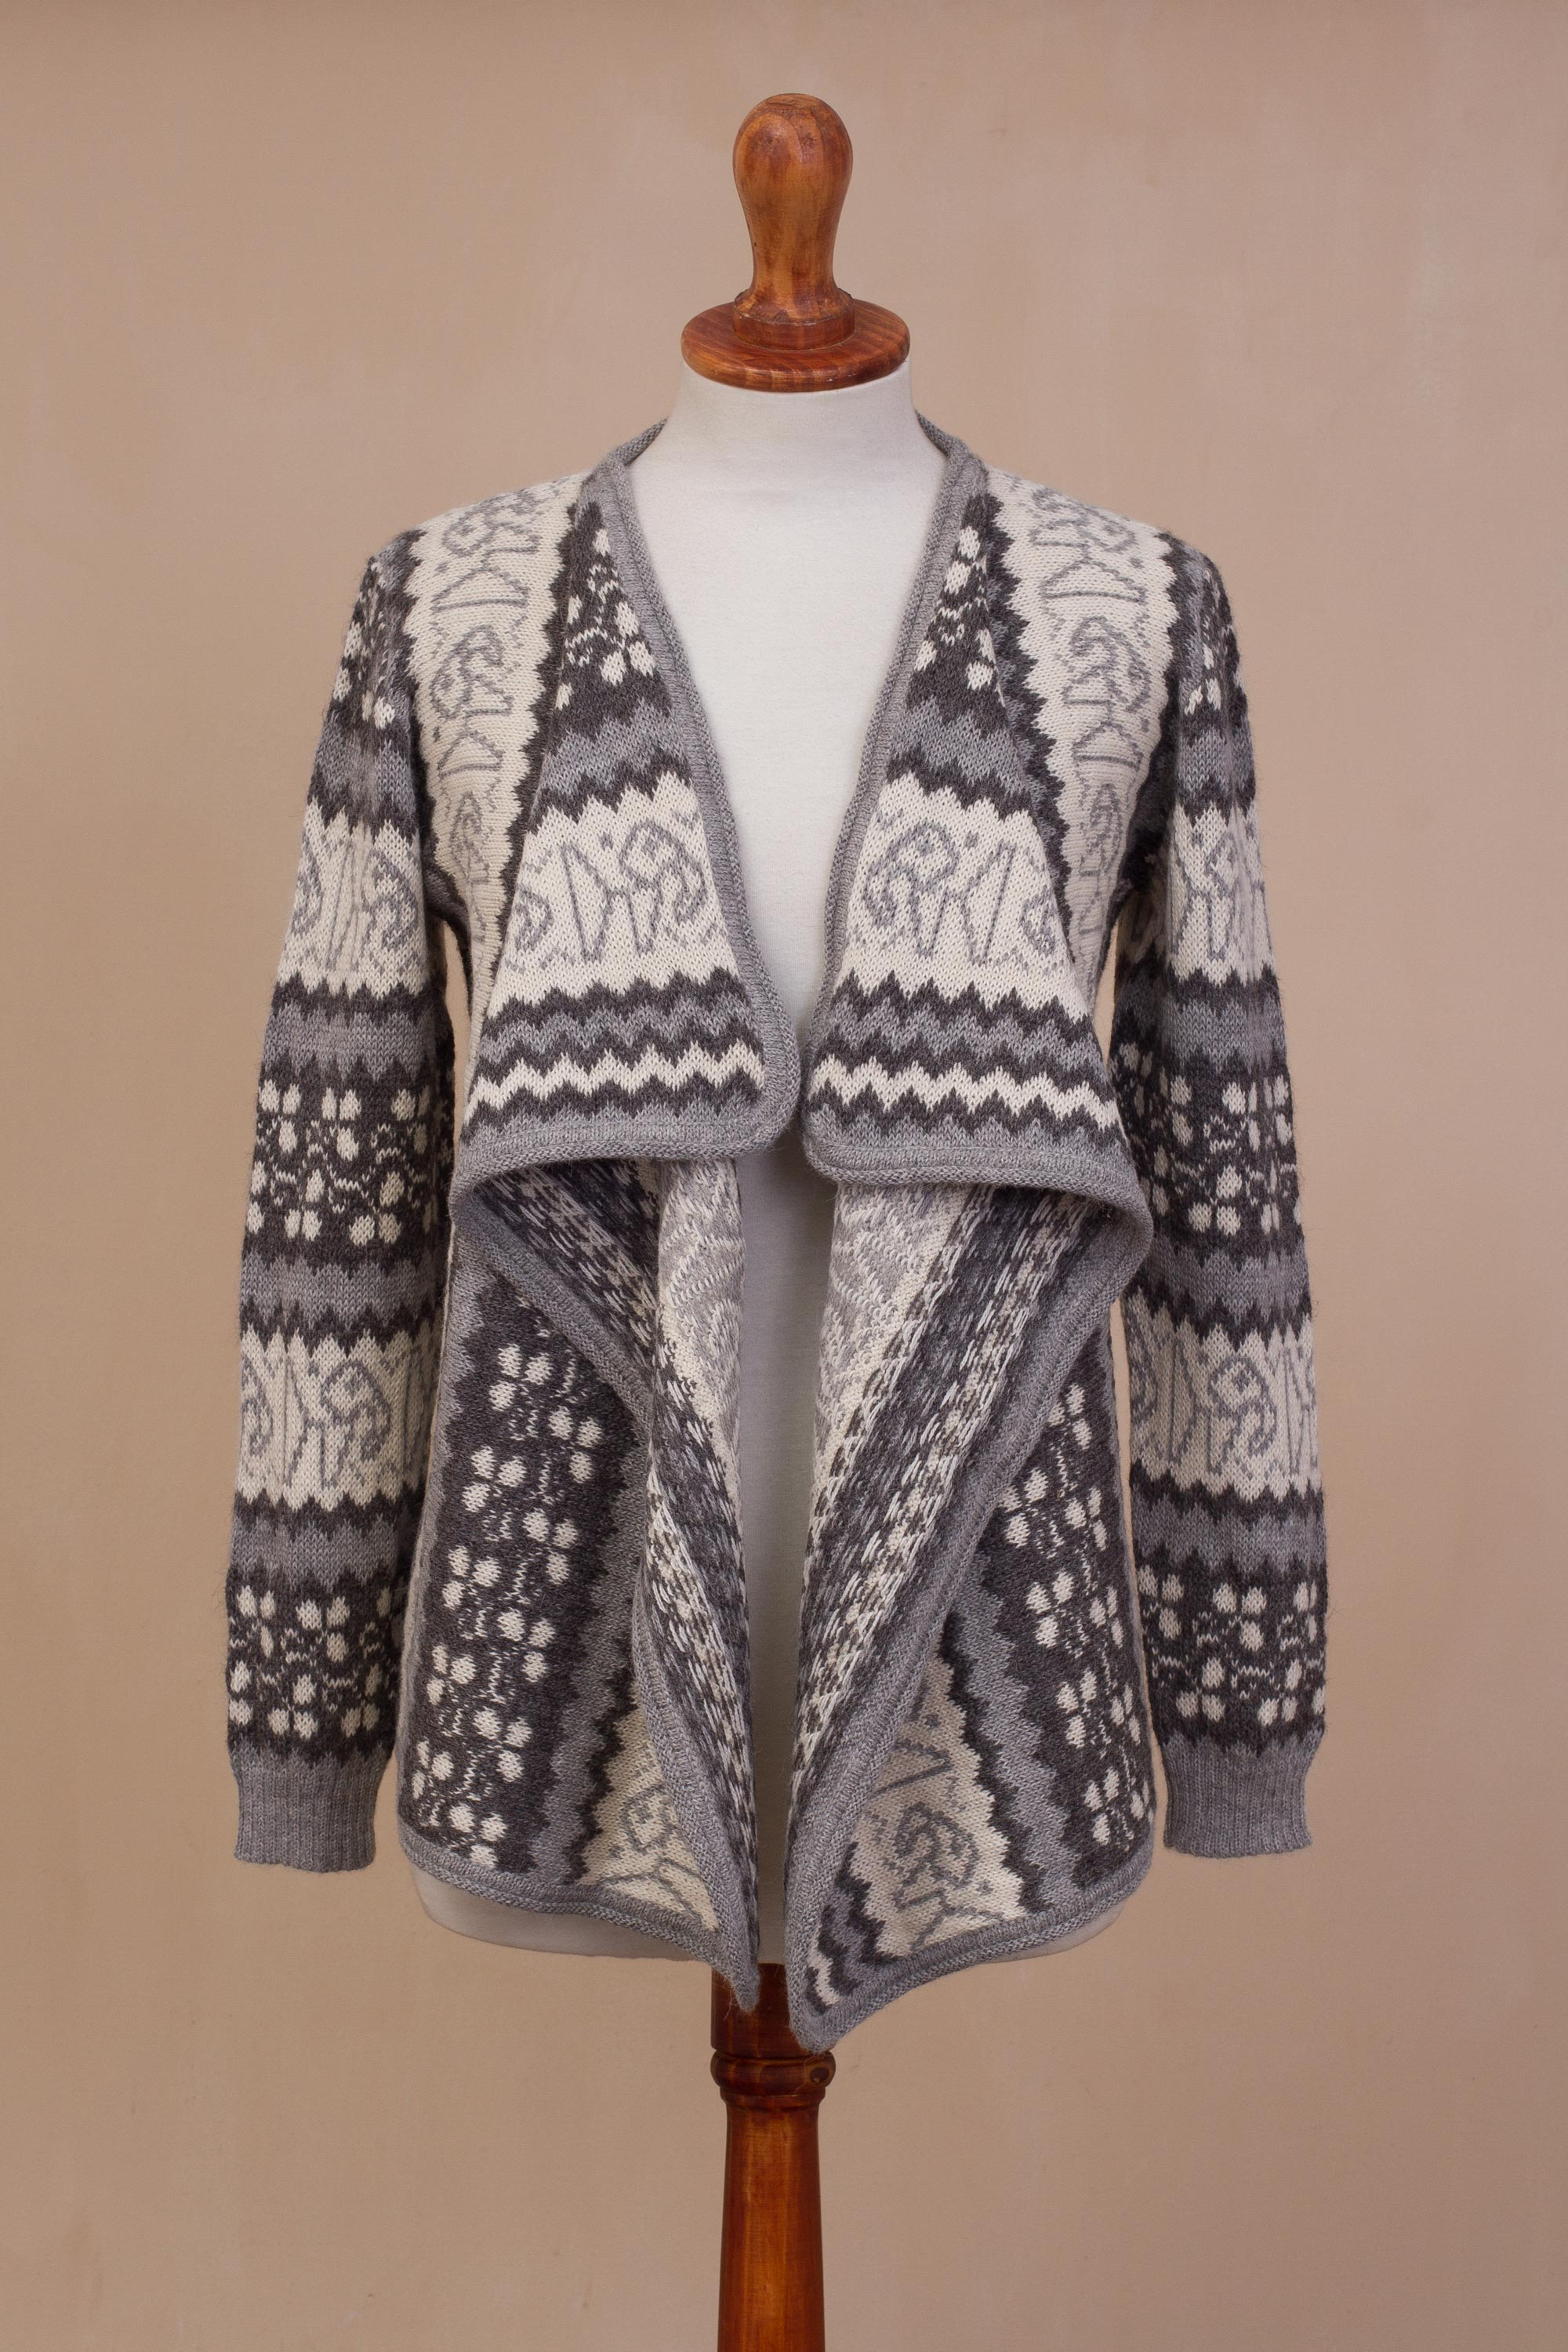 Knit Grey and Ivory Alpaca Cardigan Sweater from Peru - Cozy Warmth in ...